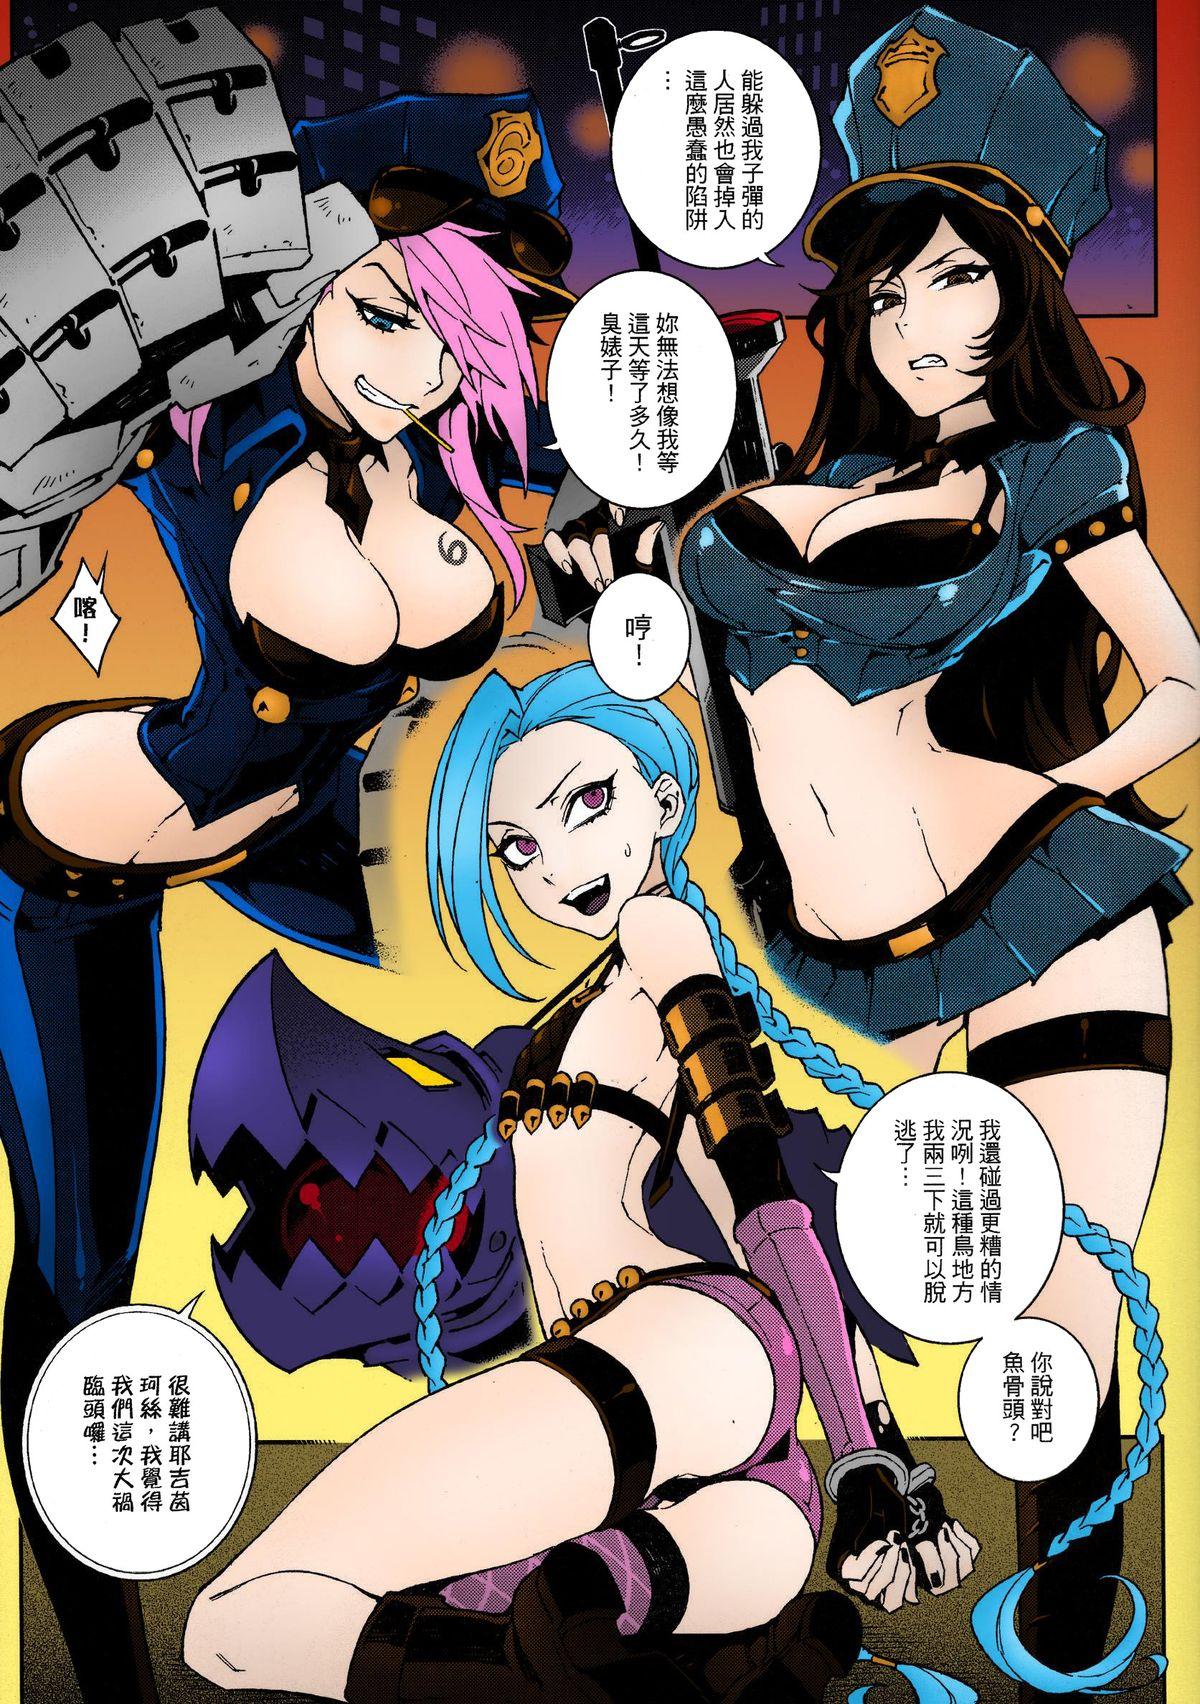 Semen JINX Come On! Shoot Faster - League of legends Spying - Page 4